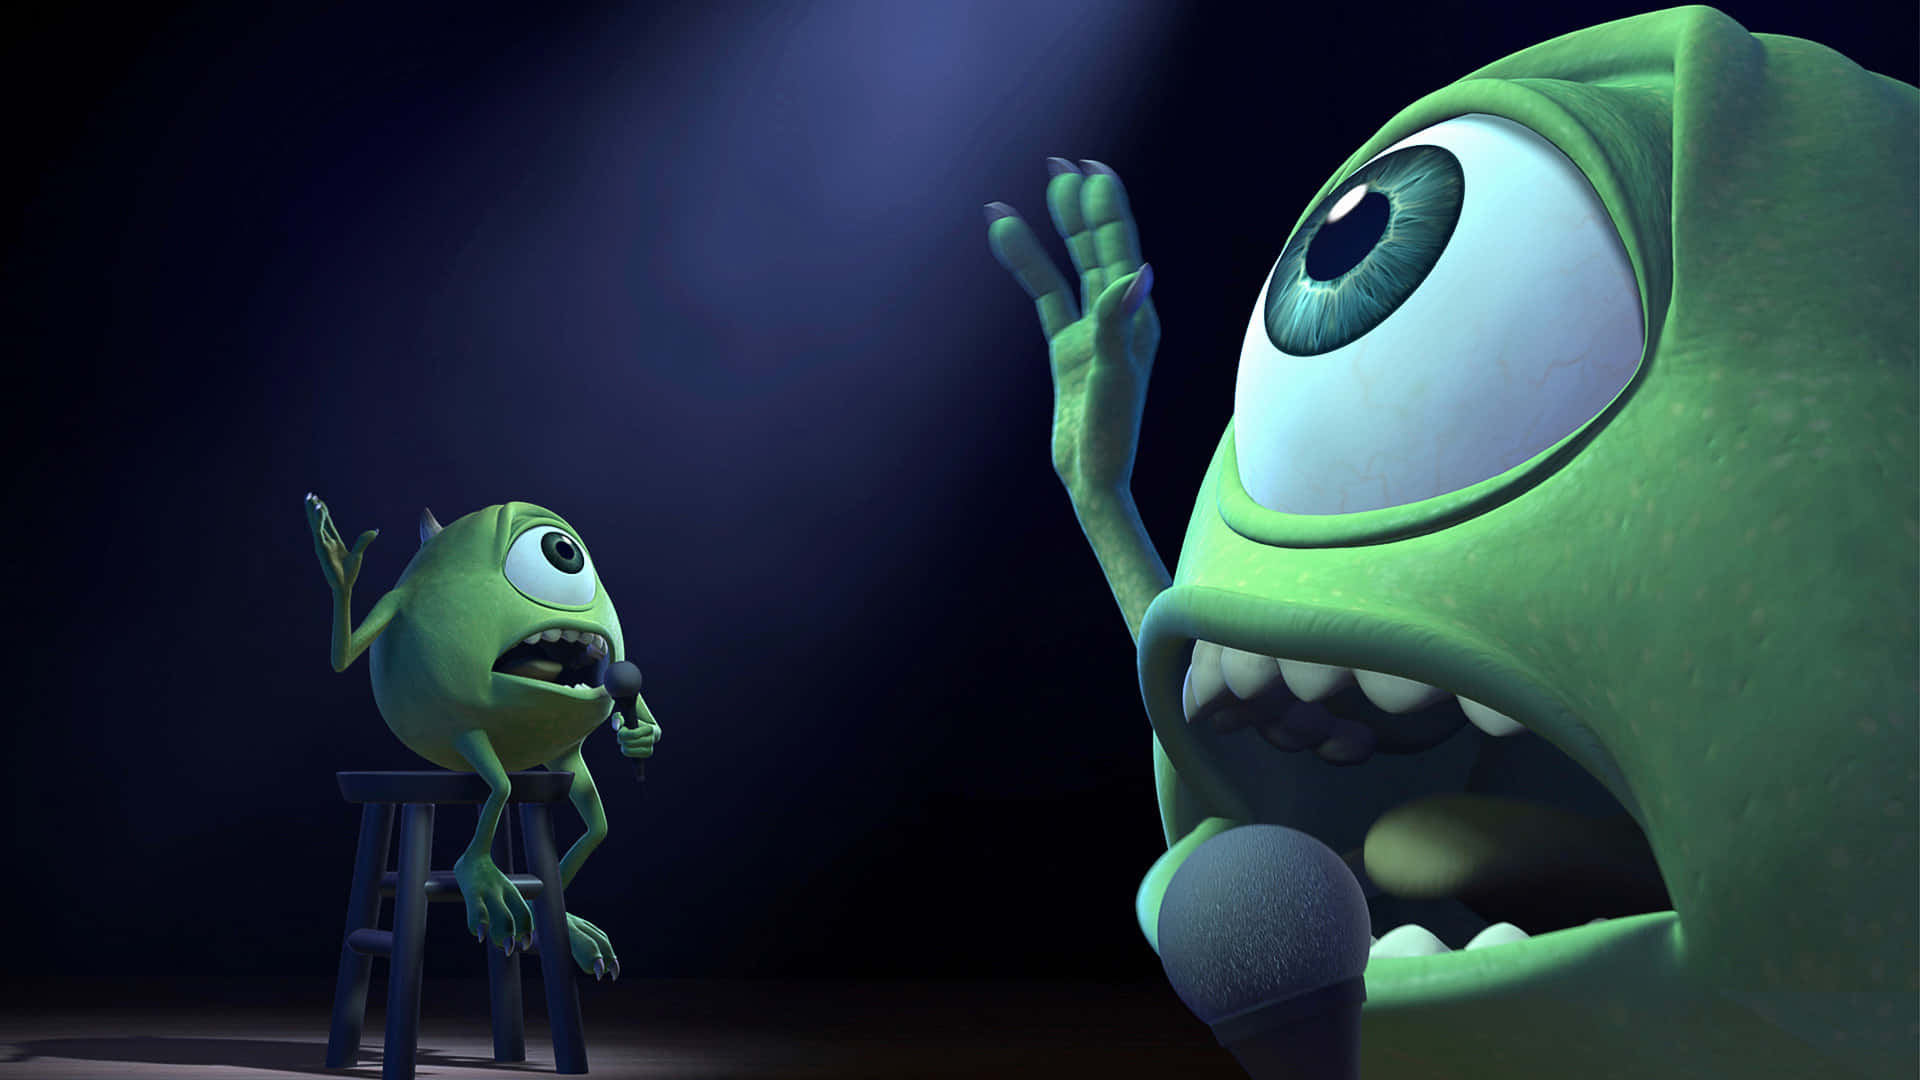 Join Mike Wazowski and Sulley on a hilarious journey in Monsters Inc!